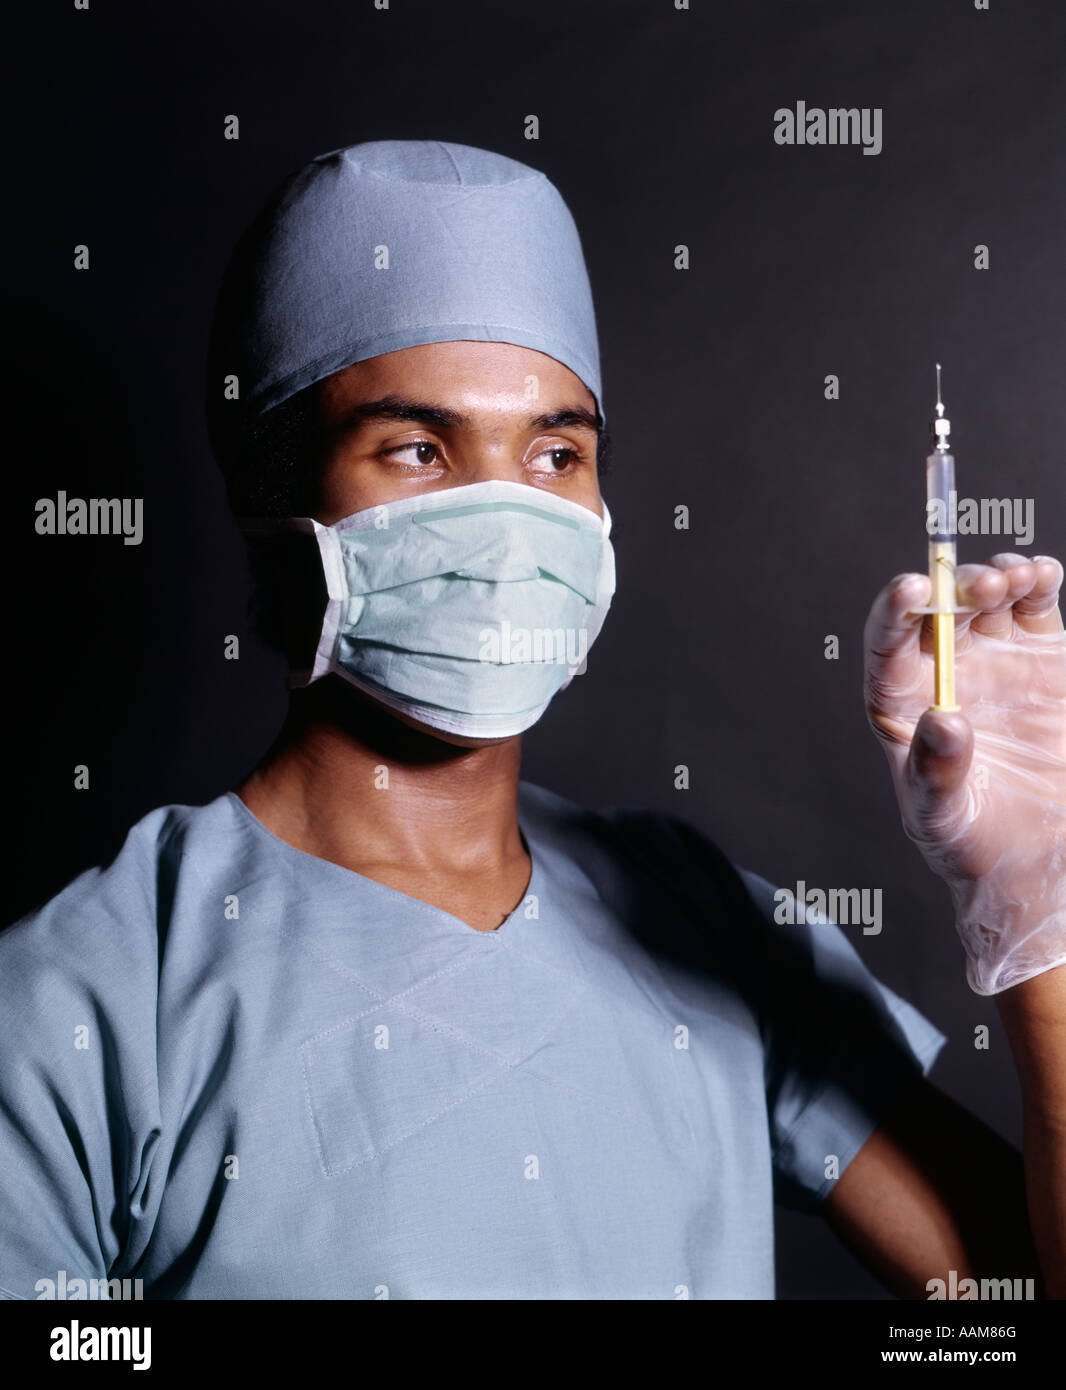 1970s AFRICAN-AMERICAN MAN DOCTOR NURSE SURGICAL MASK GOWN GLOVES HOLDING HYPODERMIC SYRINGE NEEDLE INJECTION SHOT Stock Photo